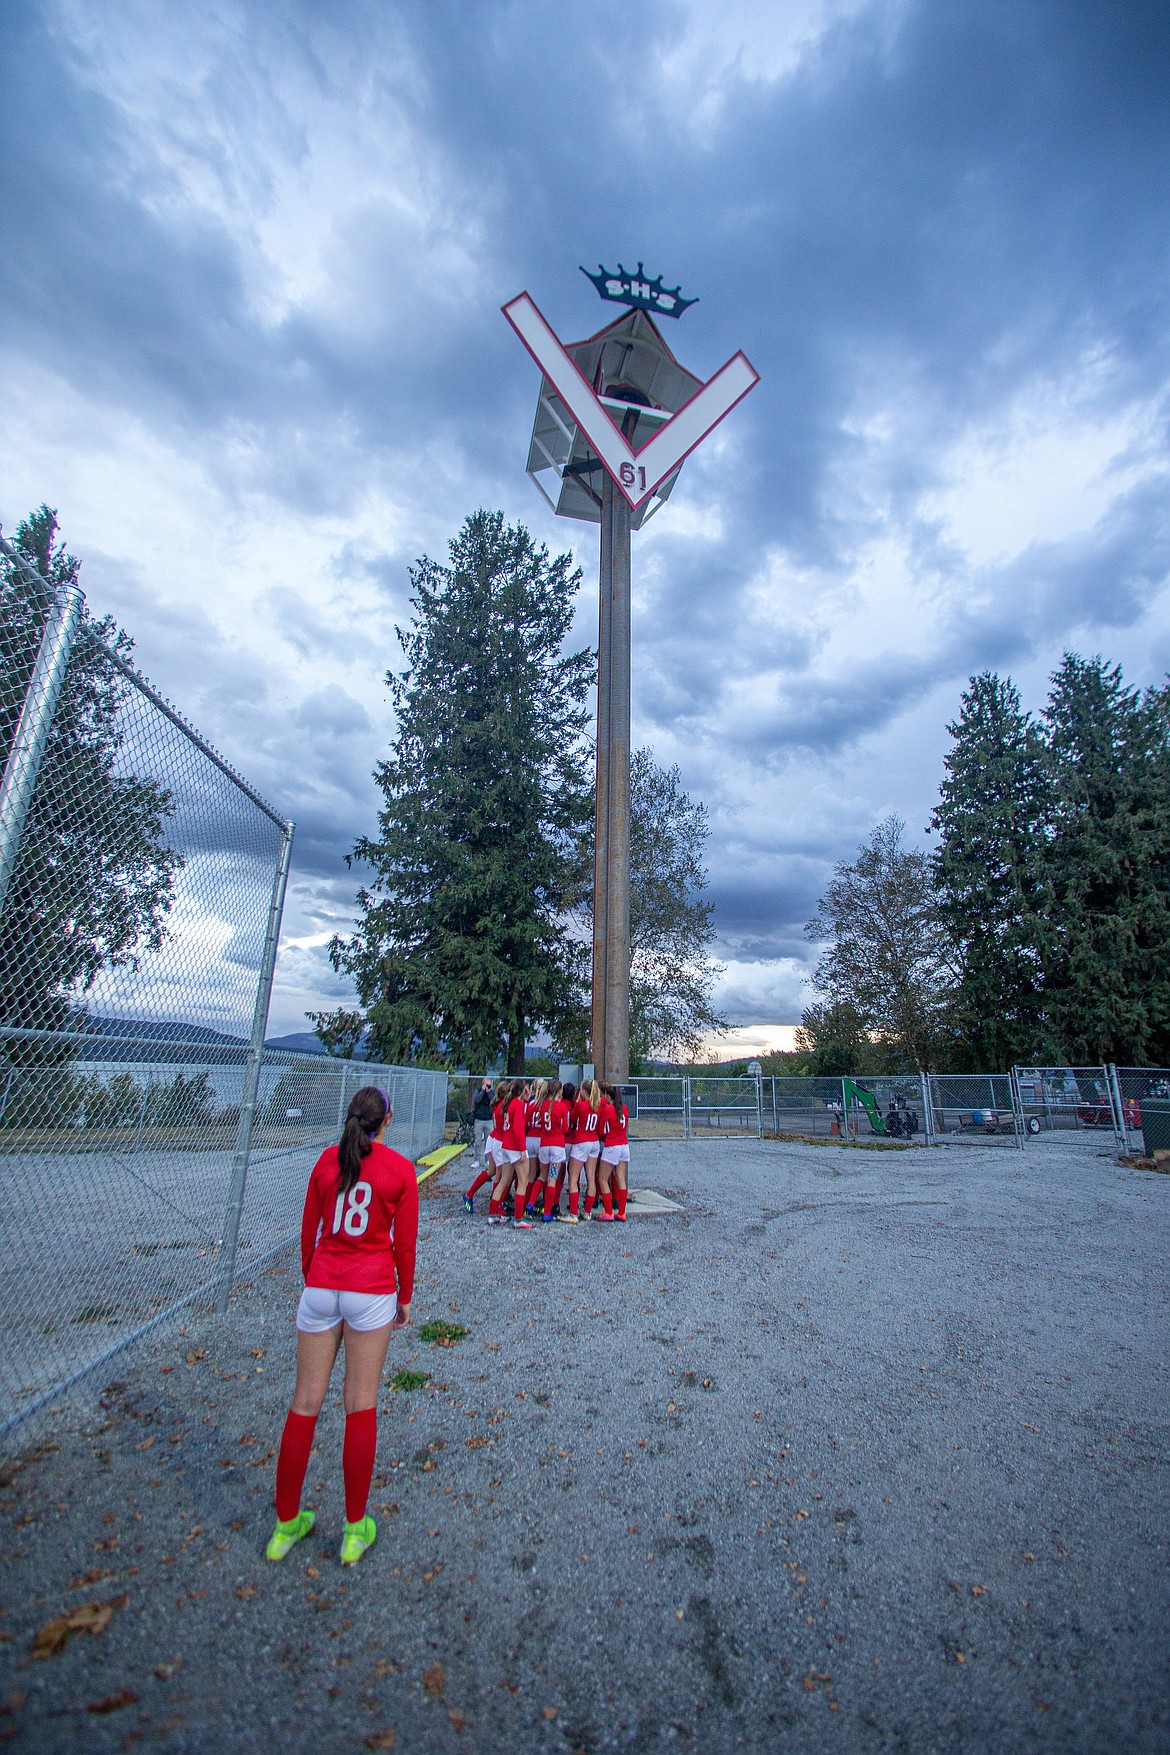 The Sandpoint girls soccer team rang the Victory Bell following its win over Moscow on Thursday at War Memorial Field. This is first time a team other than football has rang the bell.